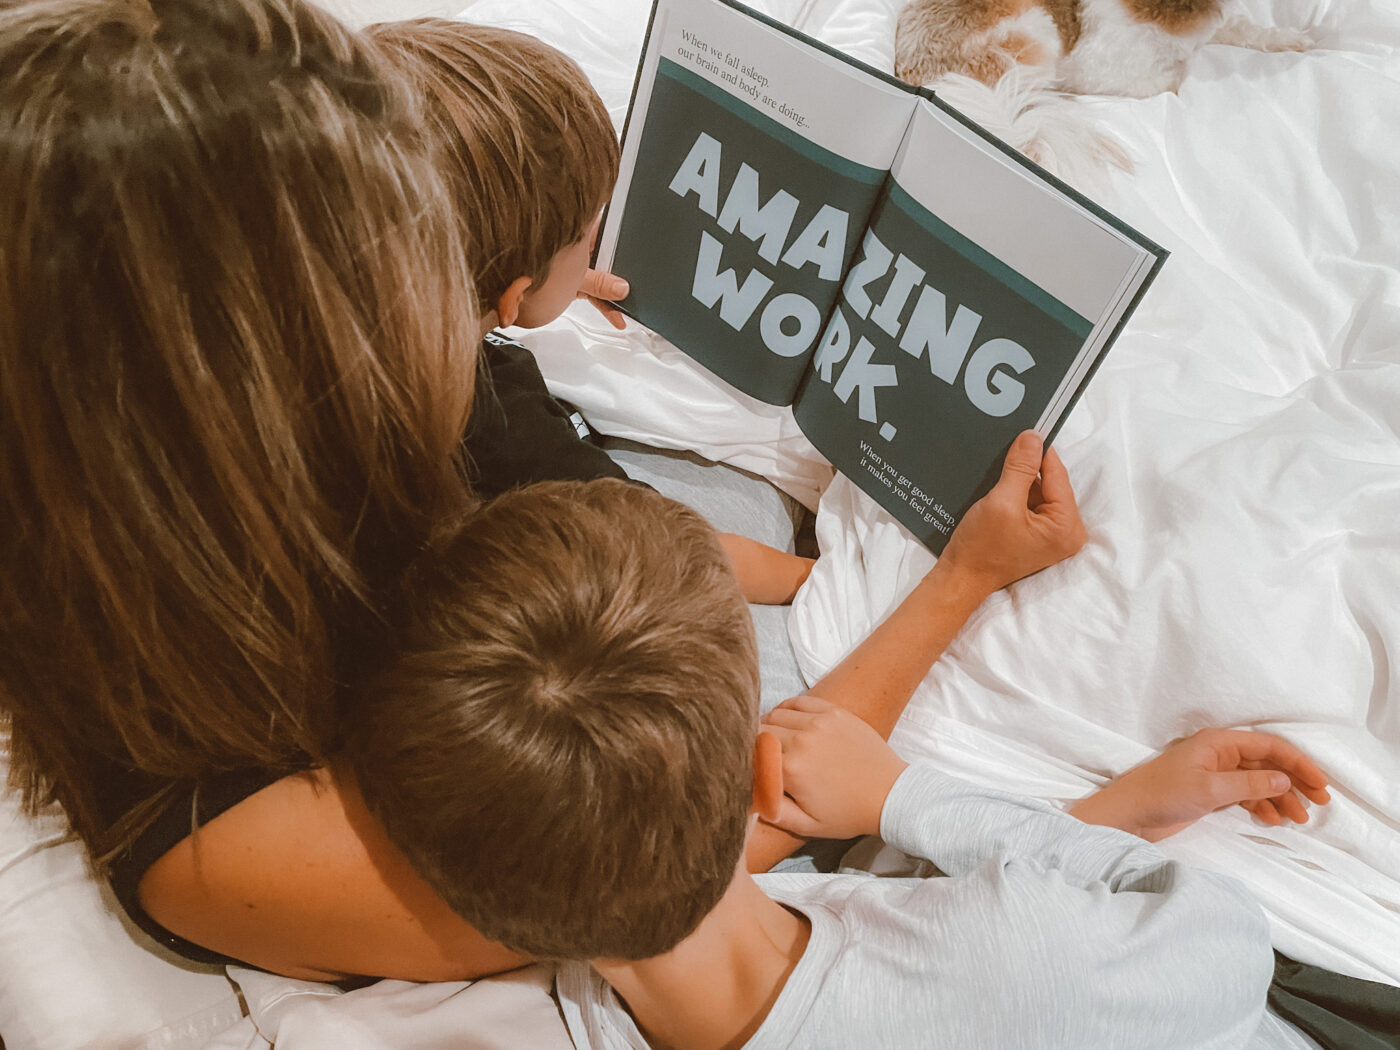 Author of 'A Kids Book About Sleep' pictured reading her book with her children. Not only does reading with your children promote early literacy skills, but this book aims to empower kids to feel good about healthy sleep habits.